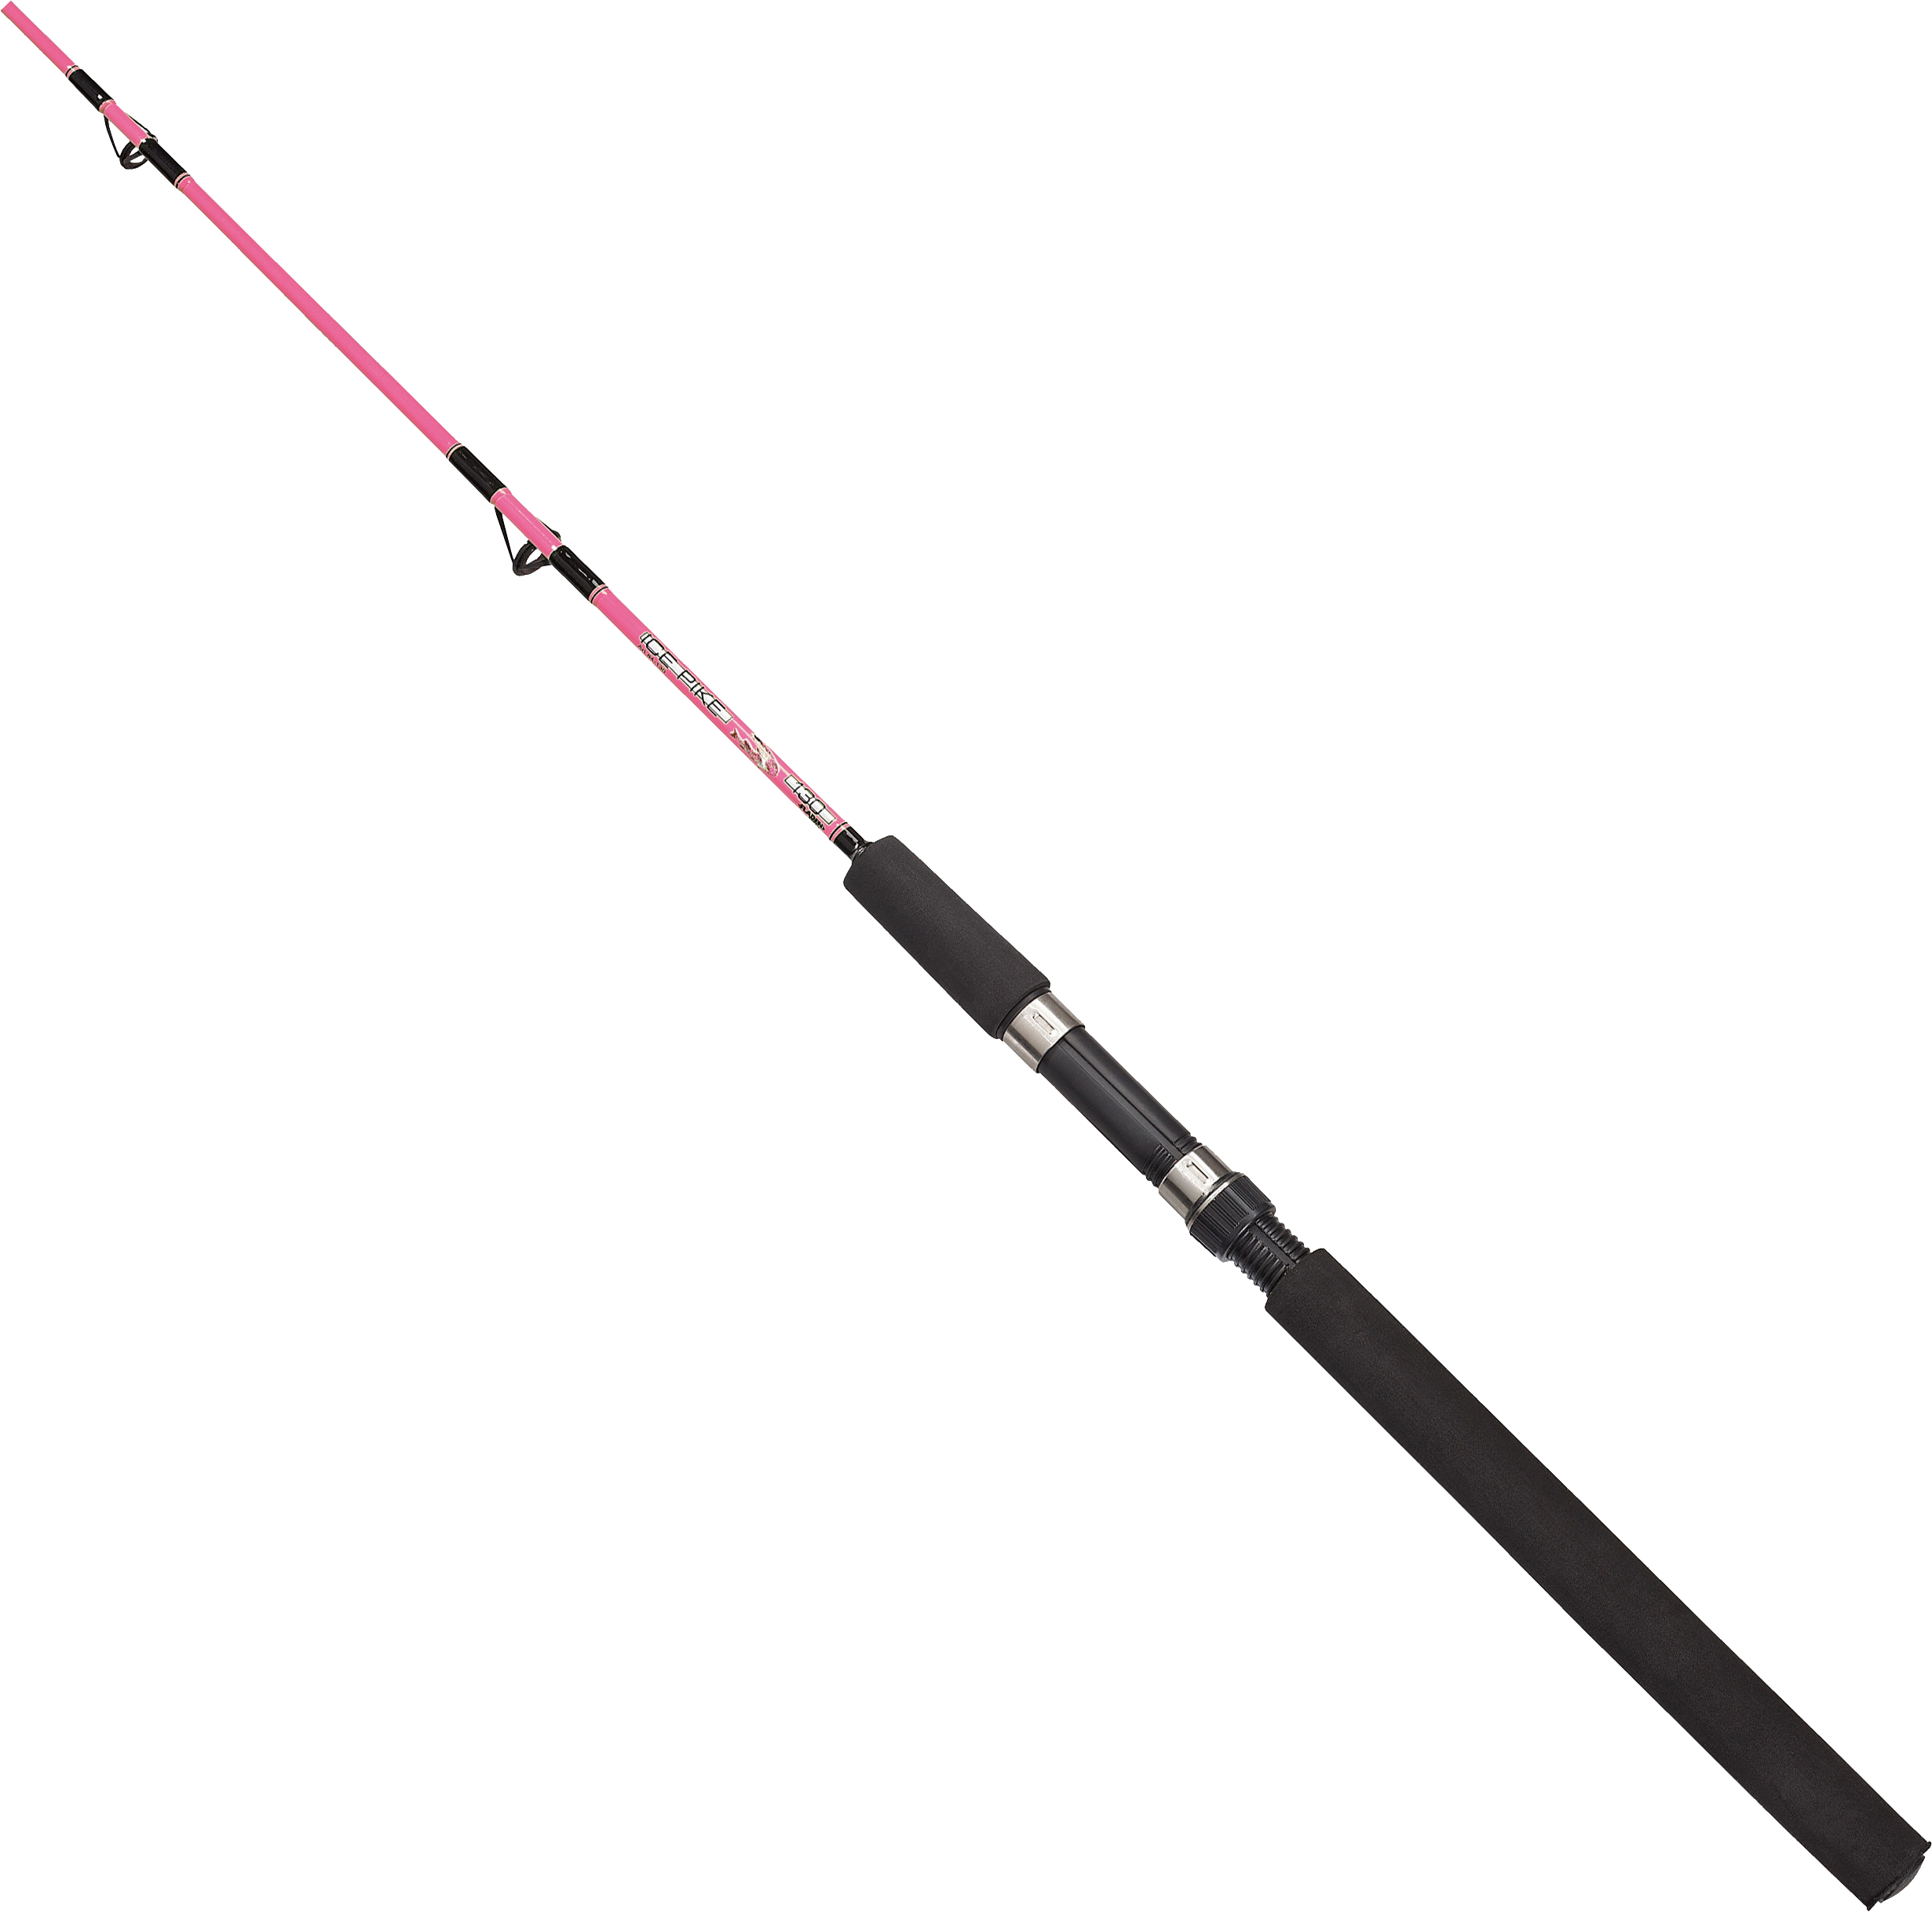 Fishing rod PNG image transparent image download, size: 2461x2435px